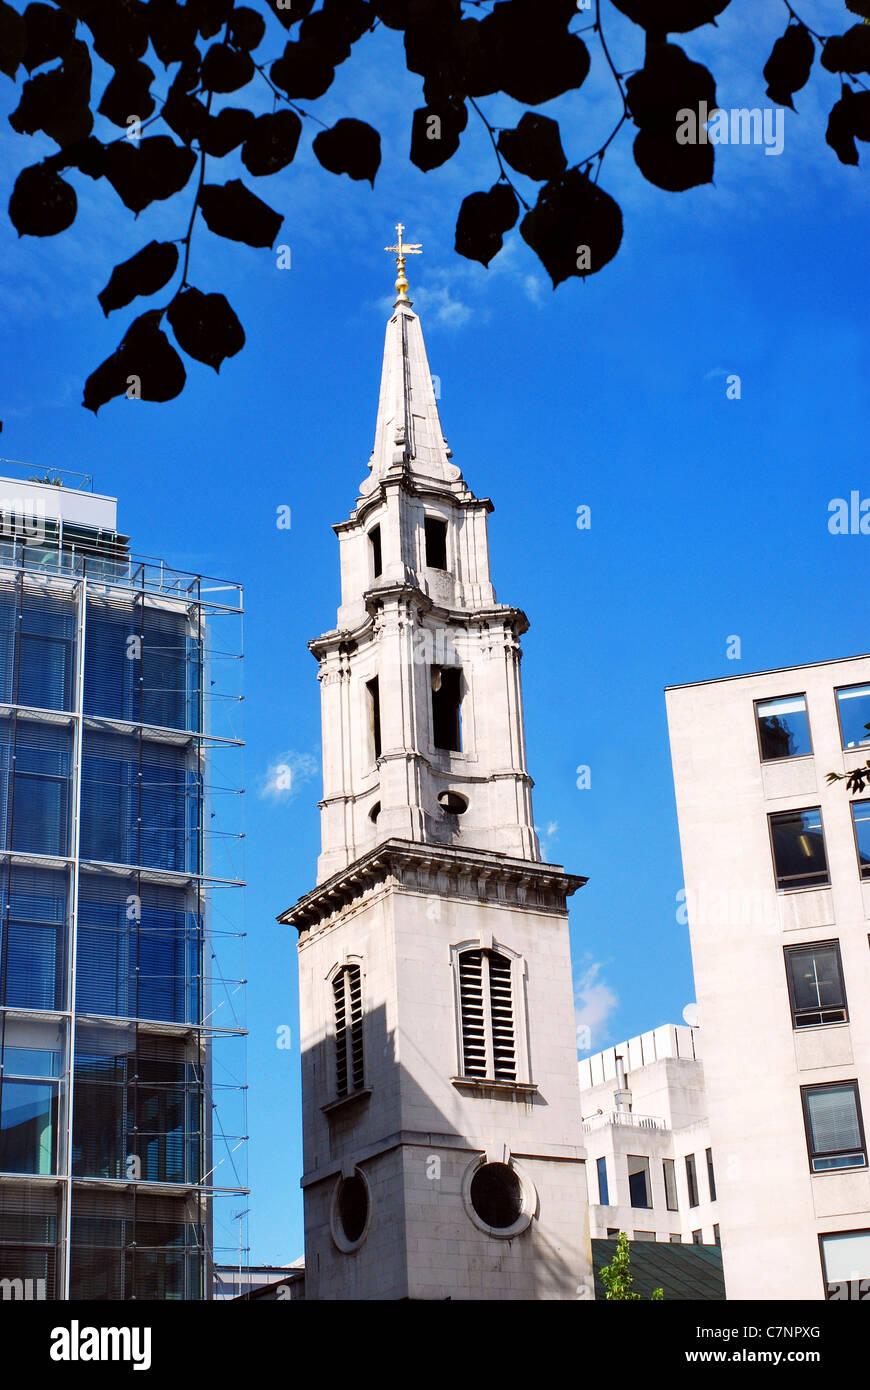 Steeple of St. Vedast's Church, founded in 1170, harmonizes with modern buildings in Cheapside, London, England, on a sunny day. Stock Photo